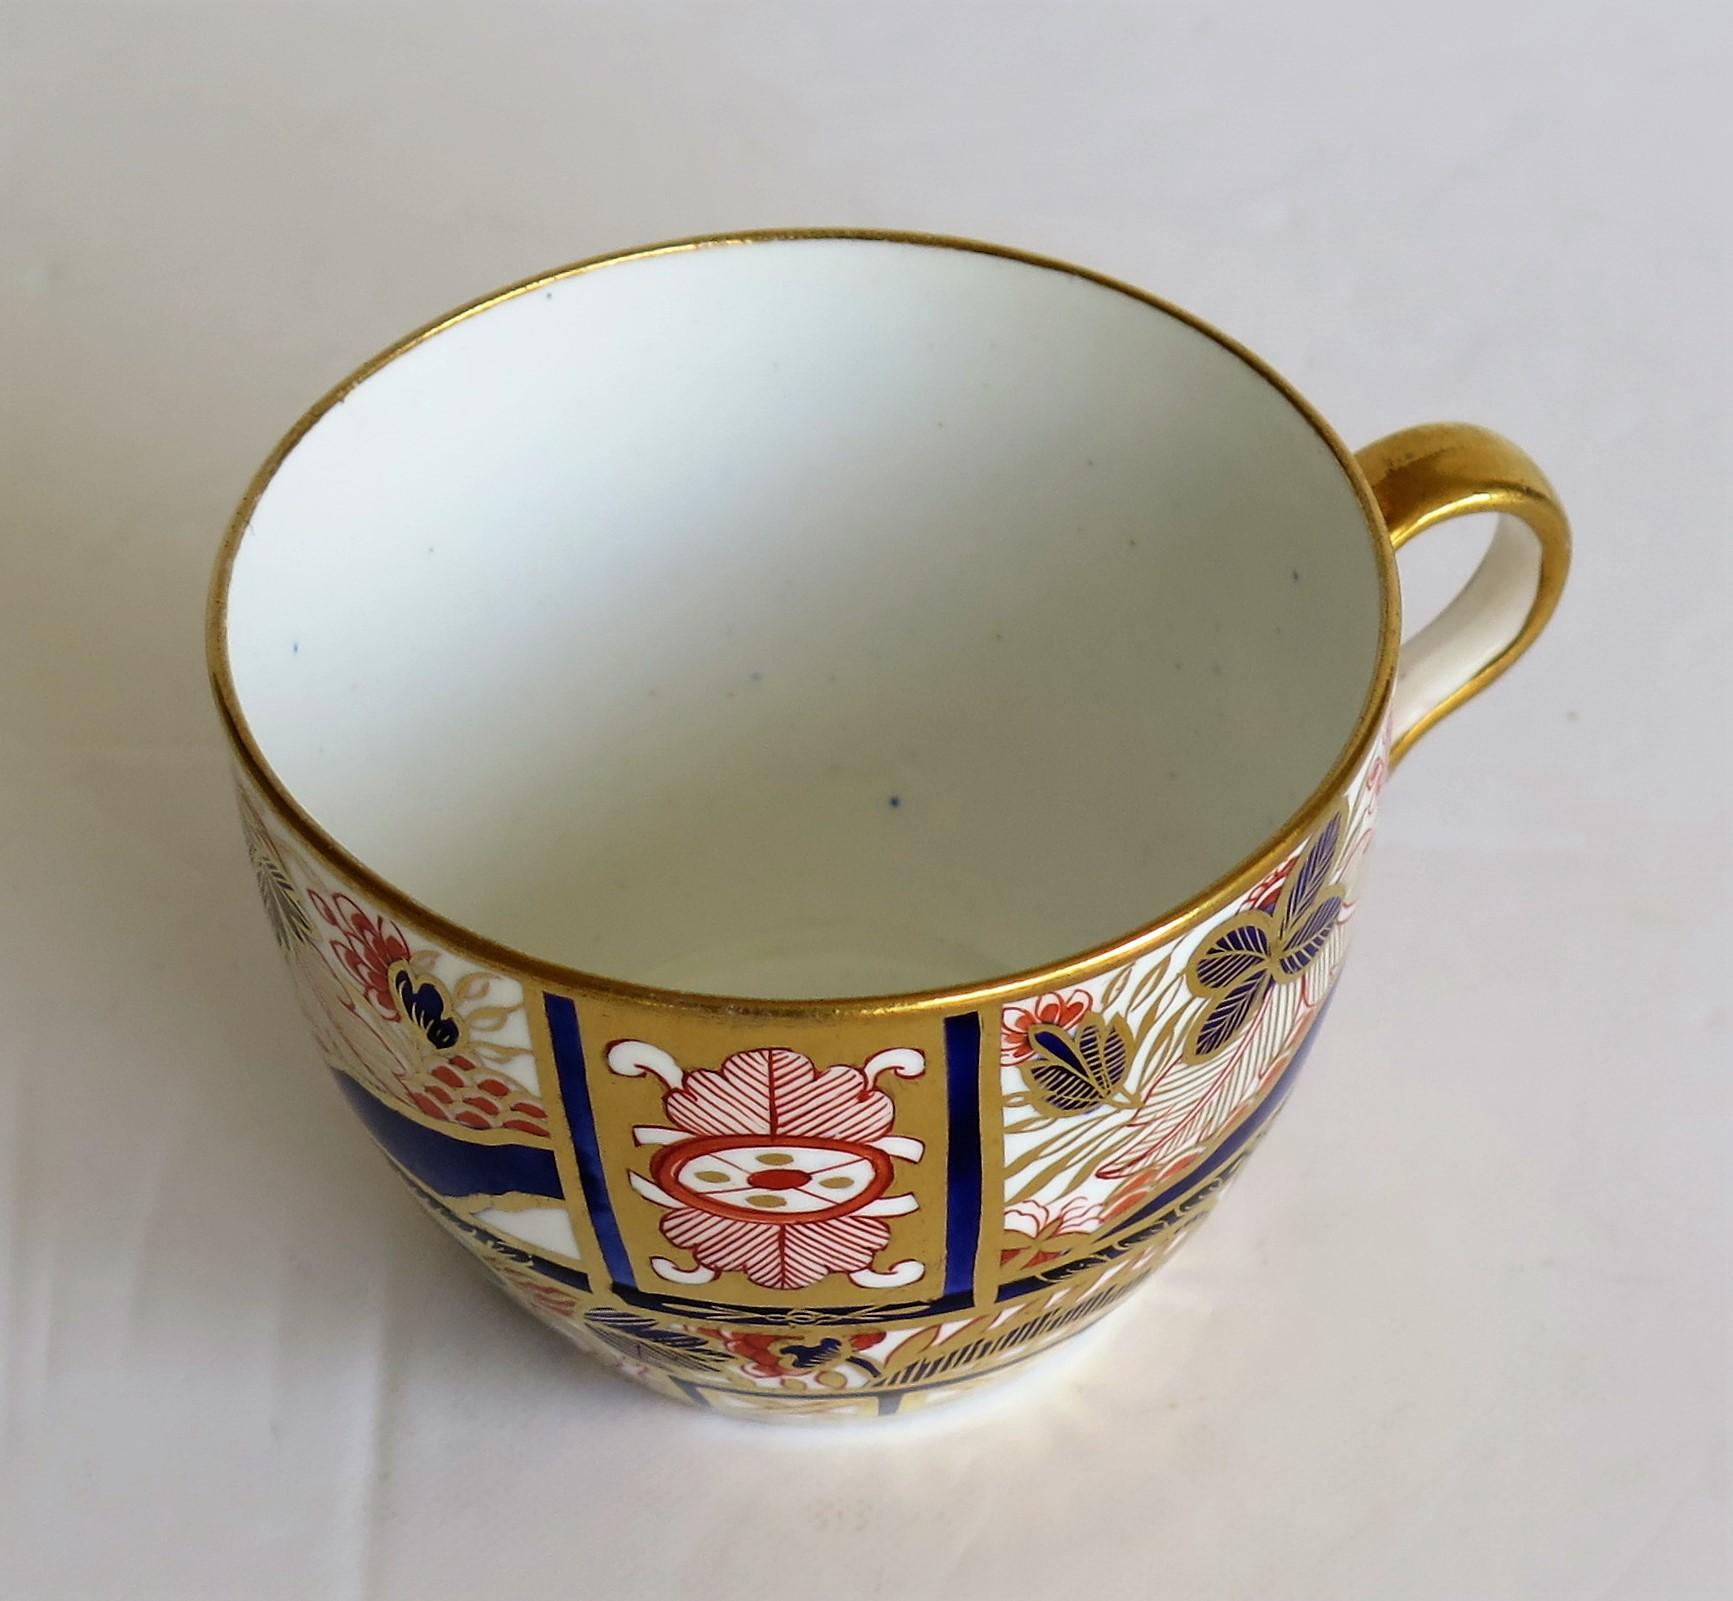 Early Spode Porcelain Tea Cup Heavily Gilded Pattern 963 Hand Painted 2